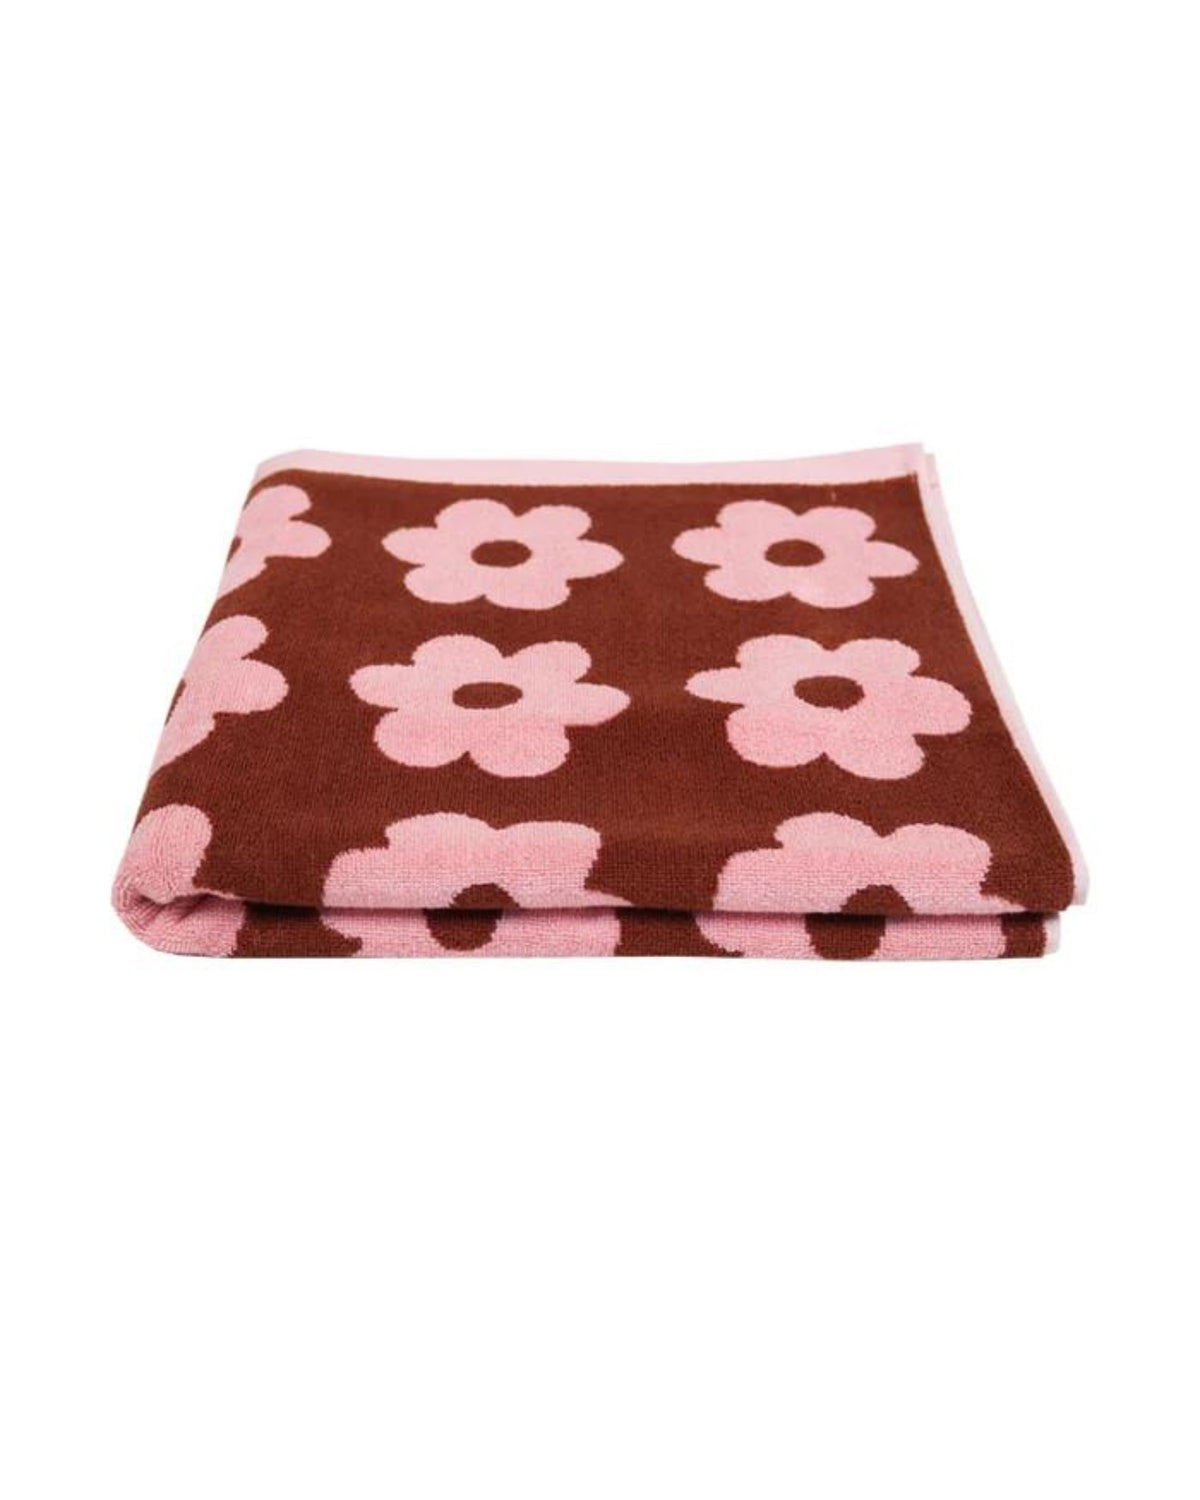 The Winter Flowerbed Bath Towel features a graphic flower motif is both pretty and playful for kids at bathtime. The chocolate and peony colour combination is contemporary and equally at home in the bathroom or on the beach. This ultra-plush towel is made from 100% organic cotton for the softest feel against kids delicate skin.